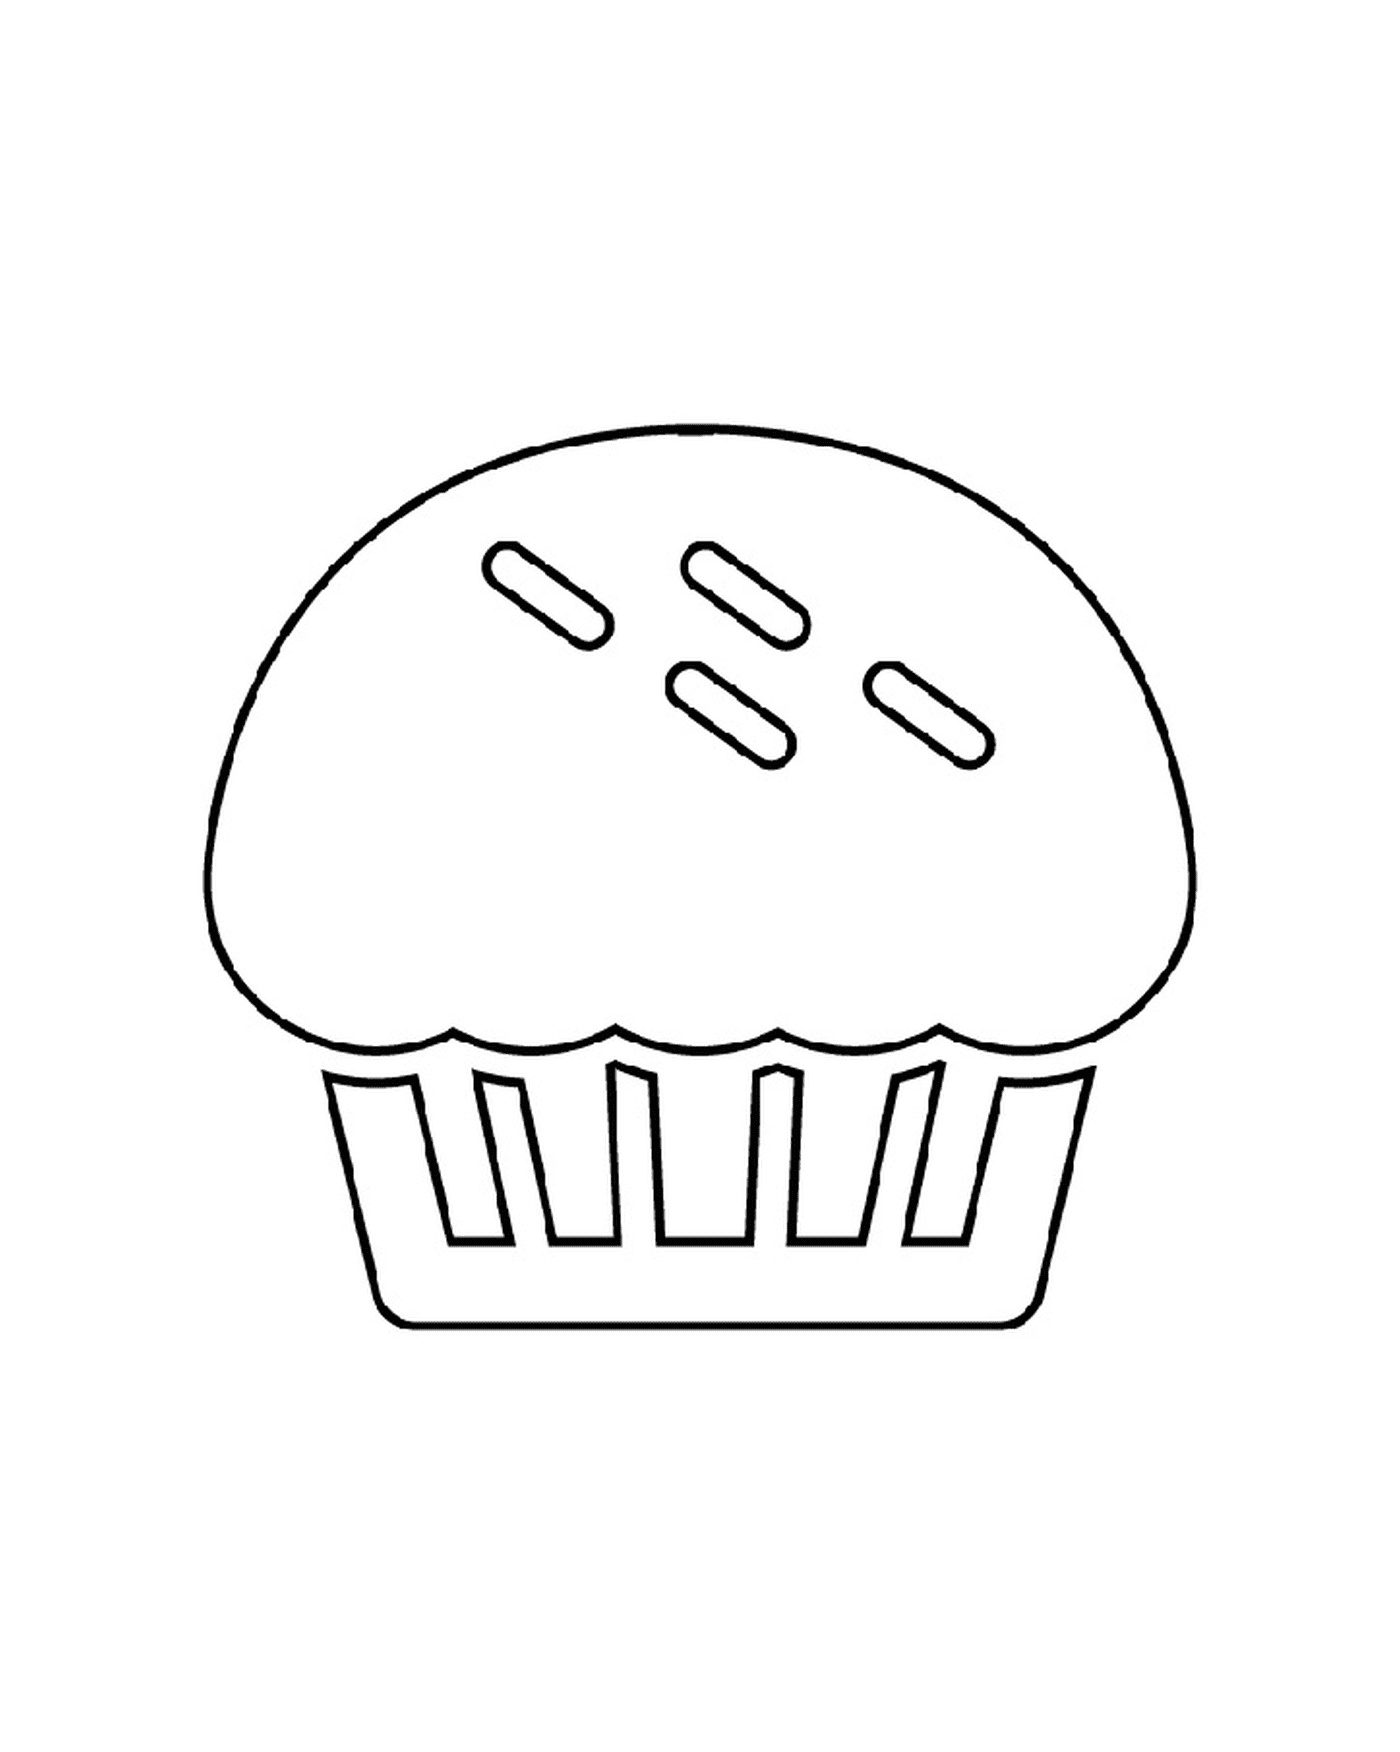  Another coloring cupcake 